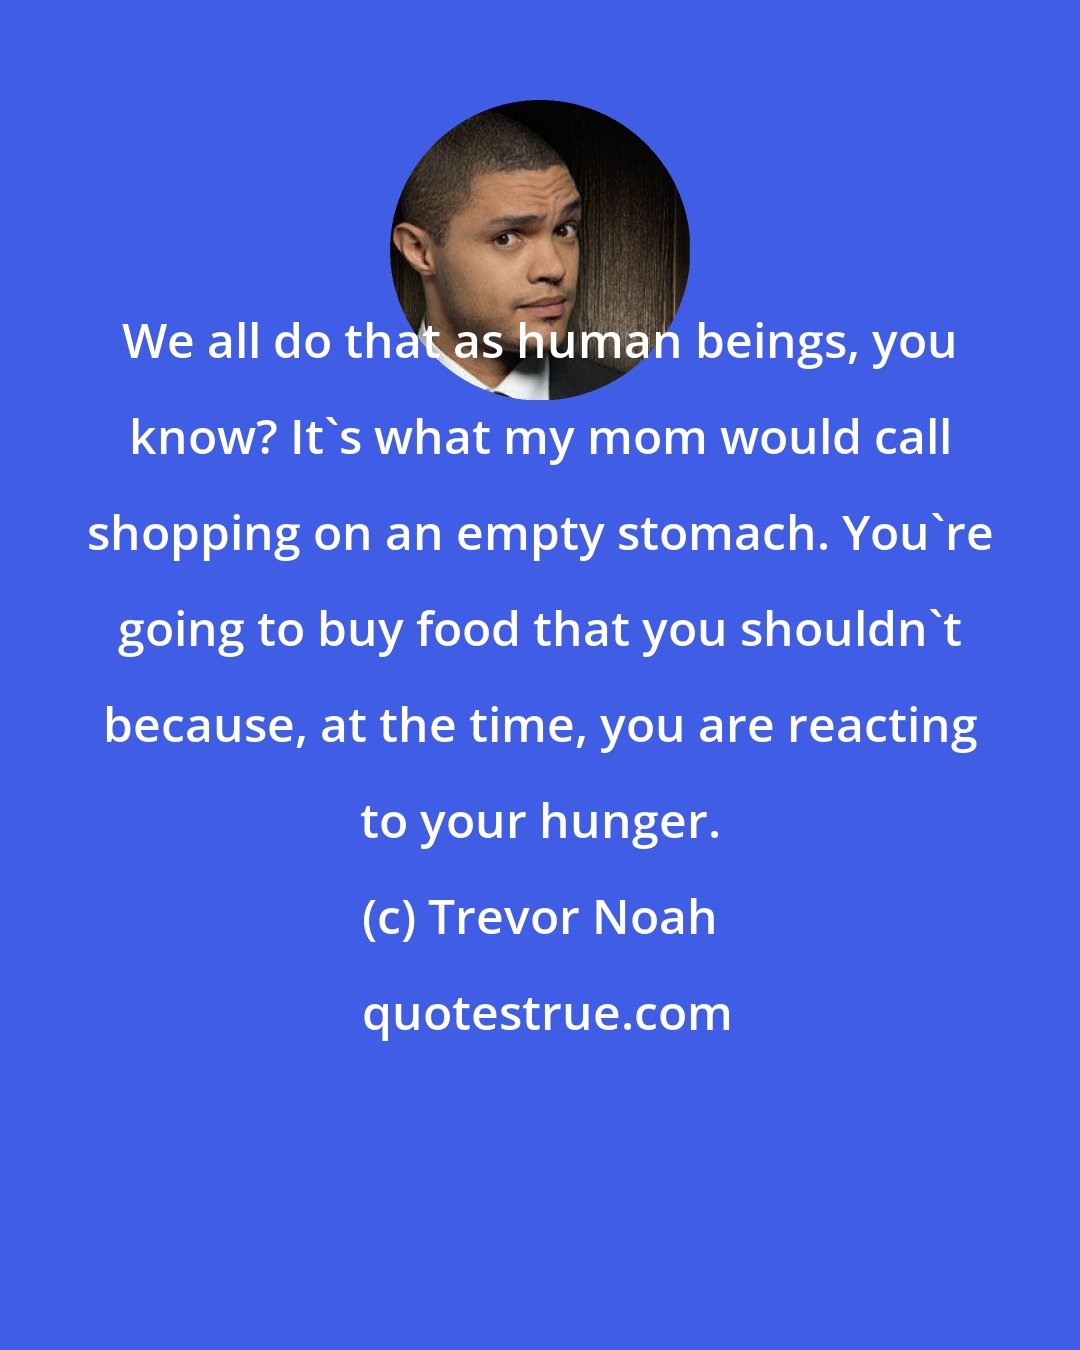 Trevor Noah: We all do that as human beings, you know? It's what my mom would call shopping on an empty stomach. You're going to buy food that you shouldn't because, at the time, you are reacting to your hunger.